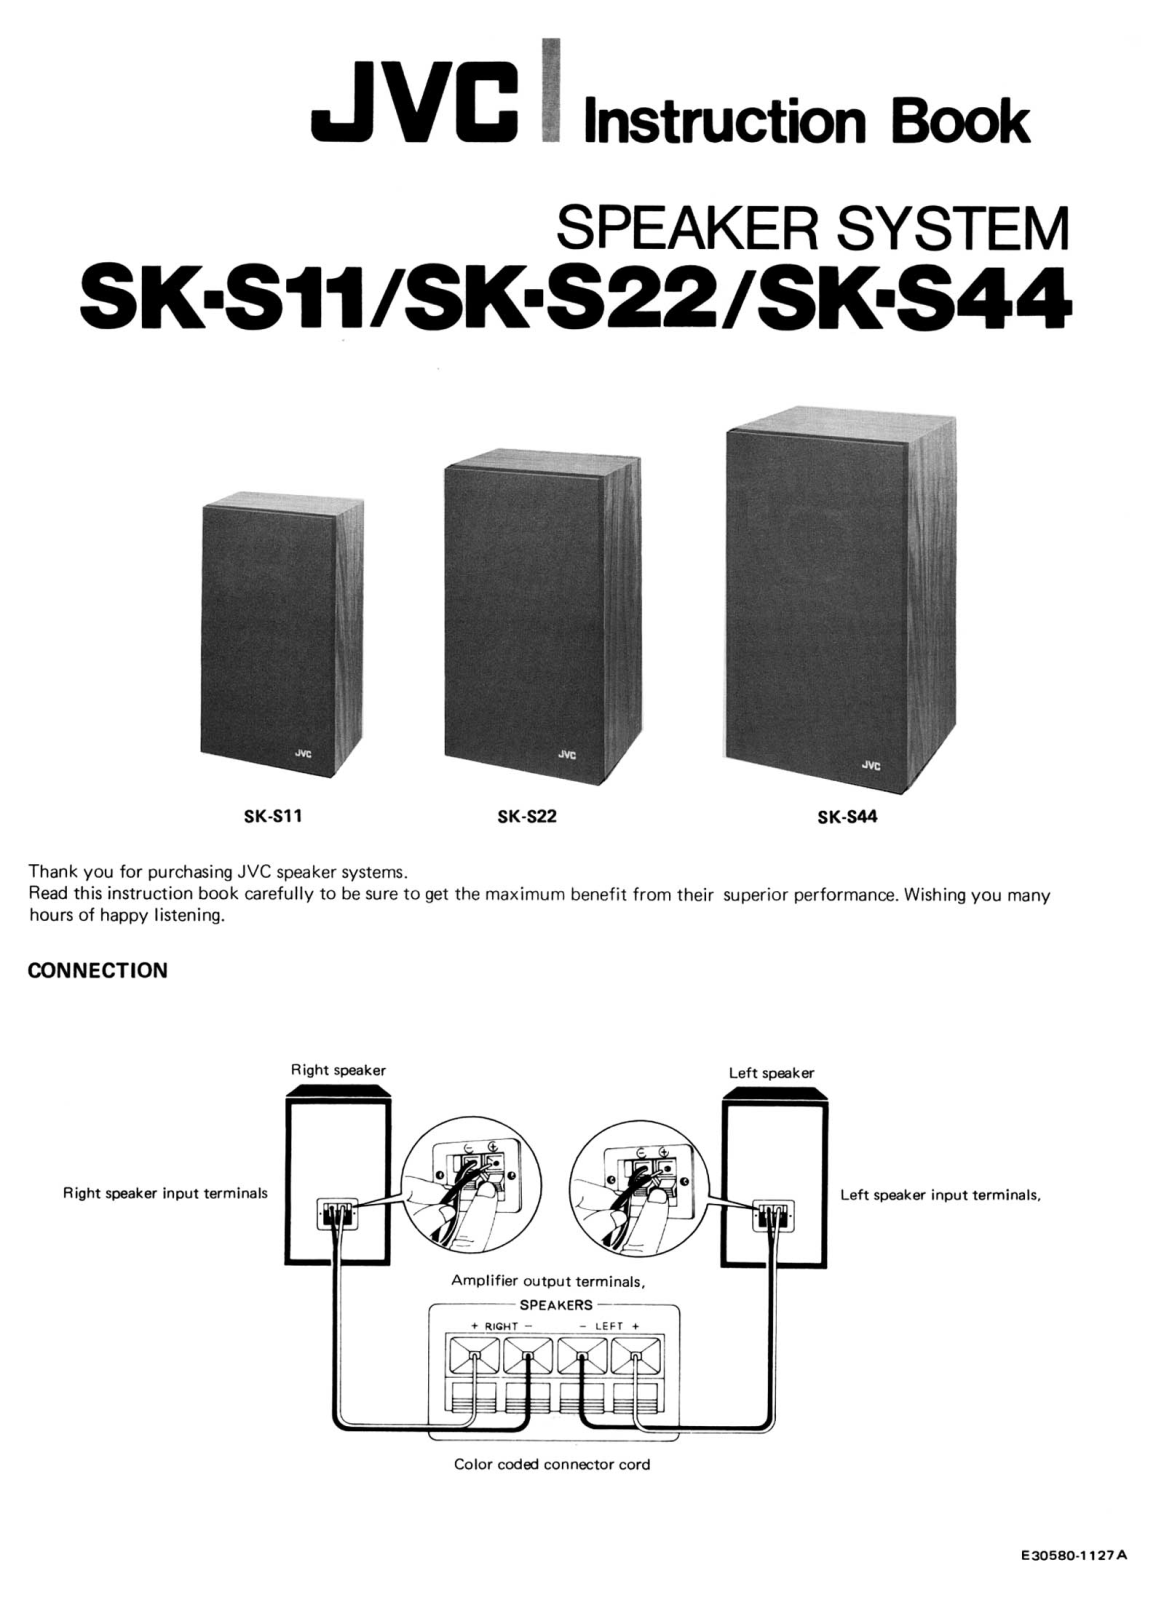 Jvc SK-S44, SK-S22, SK-S11 Owners Manual